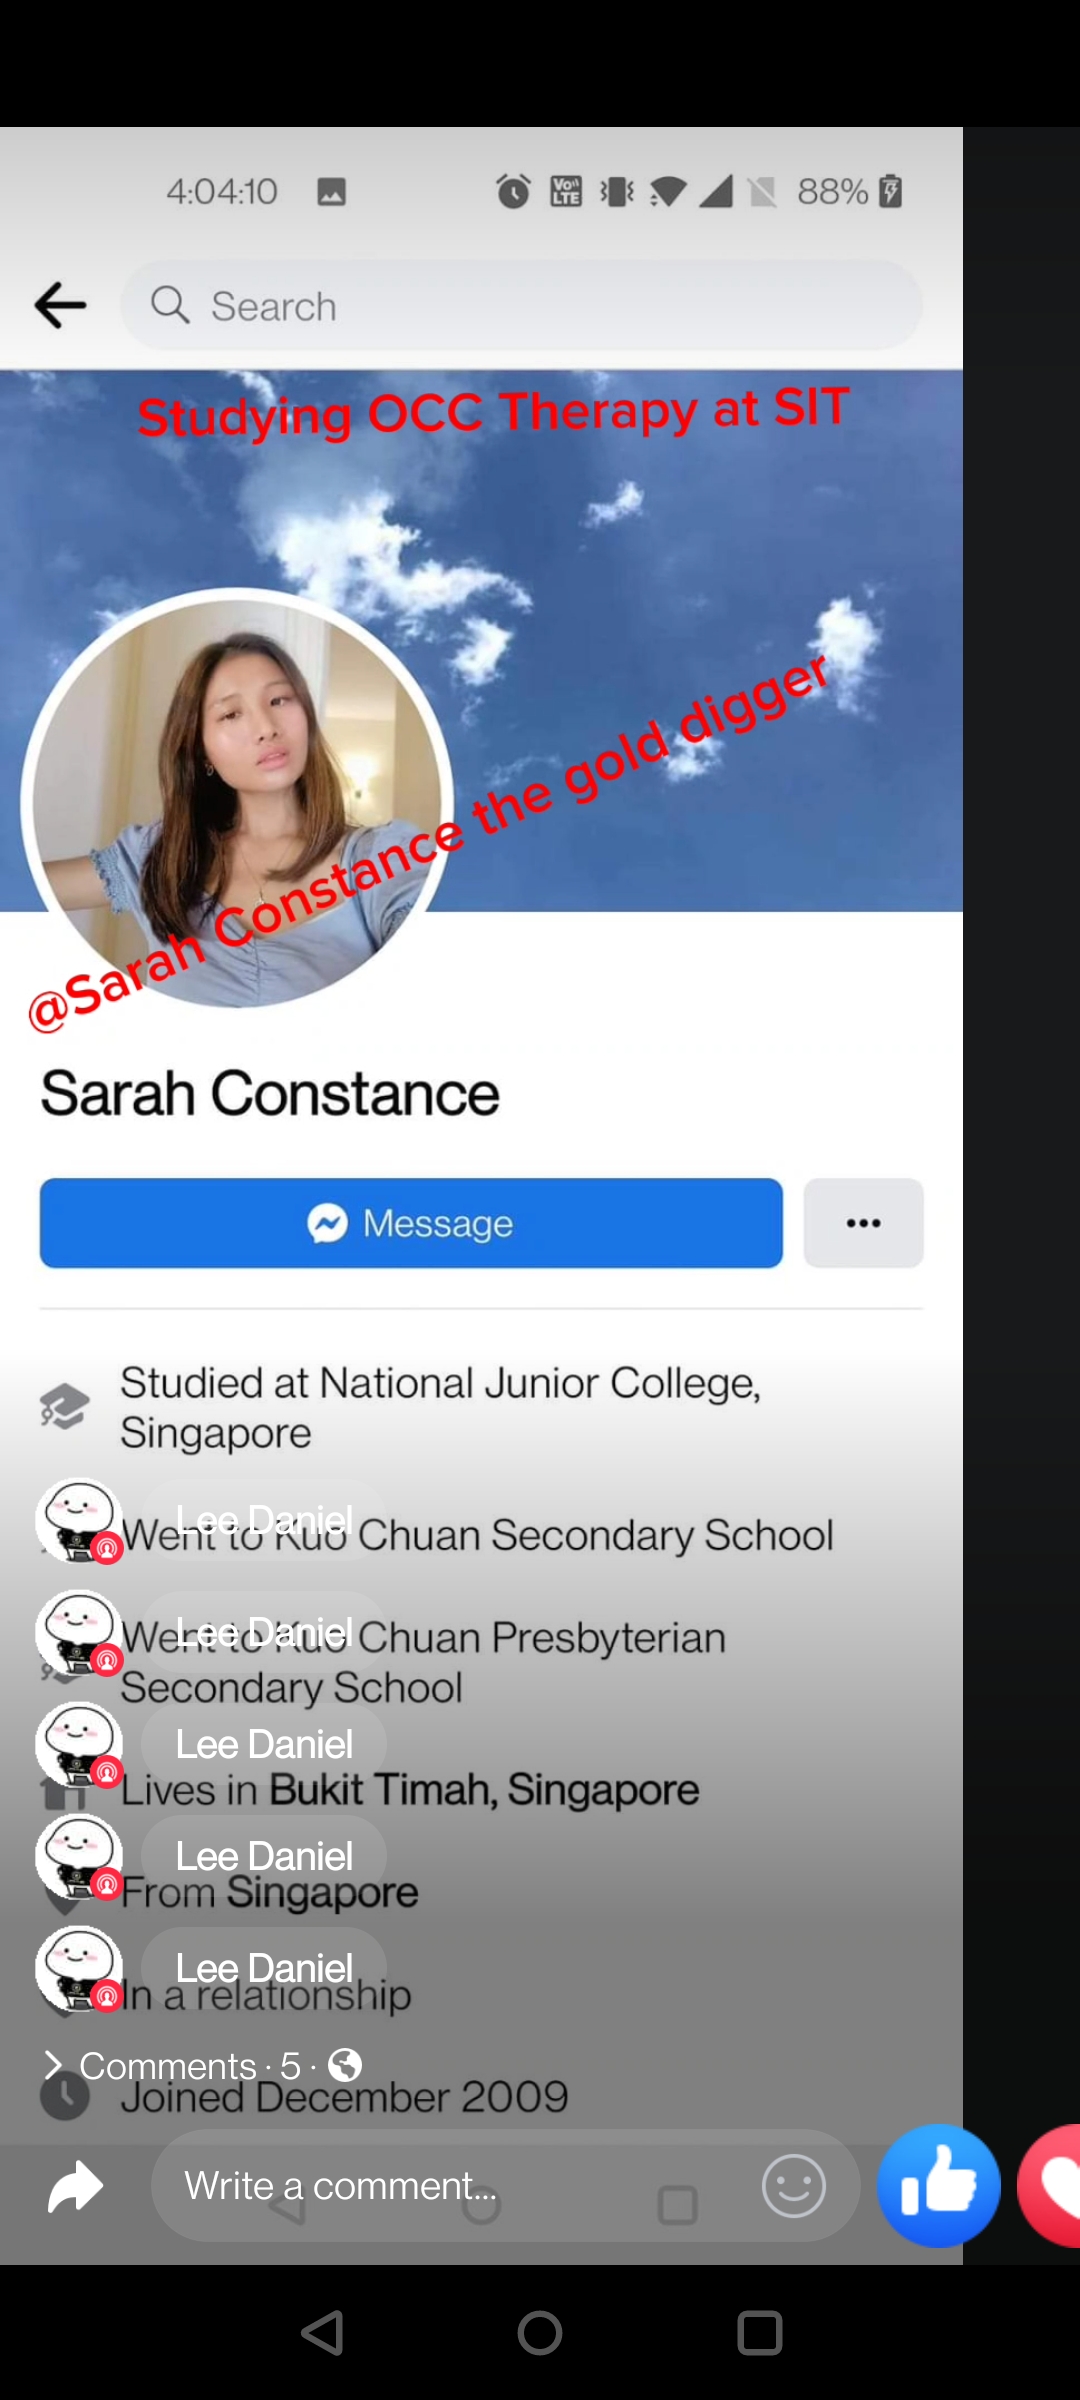 40410 Mm OB Ned 3%0

&amp;— Q_ Search

 

Sarah Constance

Studied at National Junior College,
~ Singapore

&gt;)
“wmyWeiti i Kuo Chuan Secondary School

Cn)
wre :¢ ¥ Lo Chuan Presbyterian
hy Secondary School

 

0 in Bukit Timah, Singapore
a

yr a;

) Lee Daniel
har)

&gt; Comments-5- Q

PIR ICER ®) 1